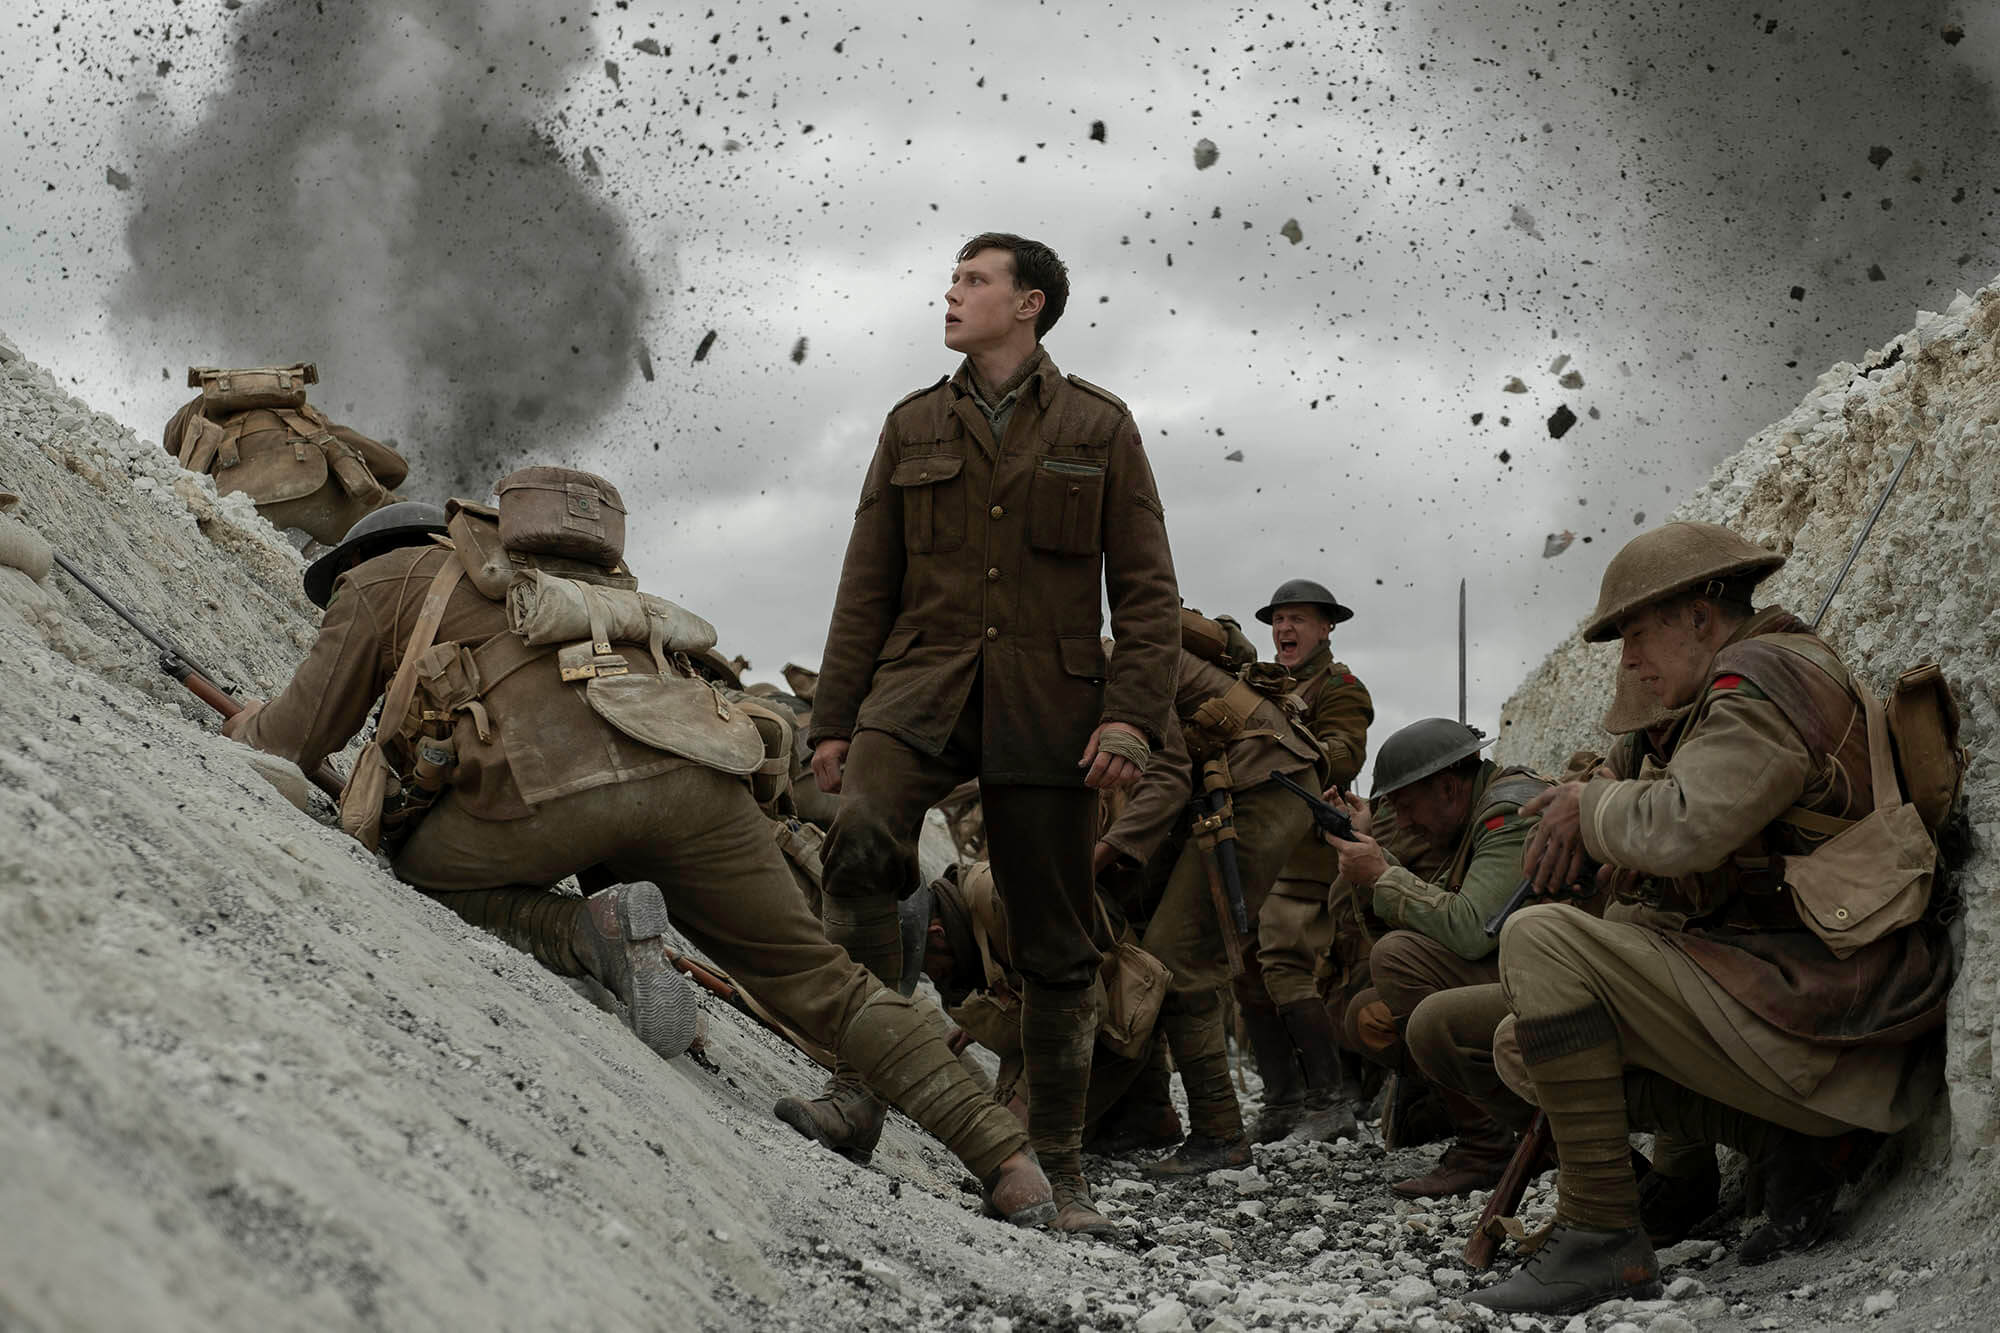 A still from director Sam Mendes' &quot;1917.&quot; (Courtesy Universal Pictures)